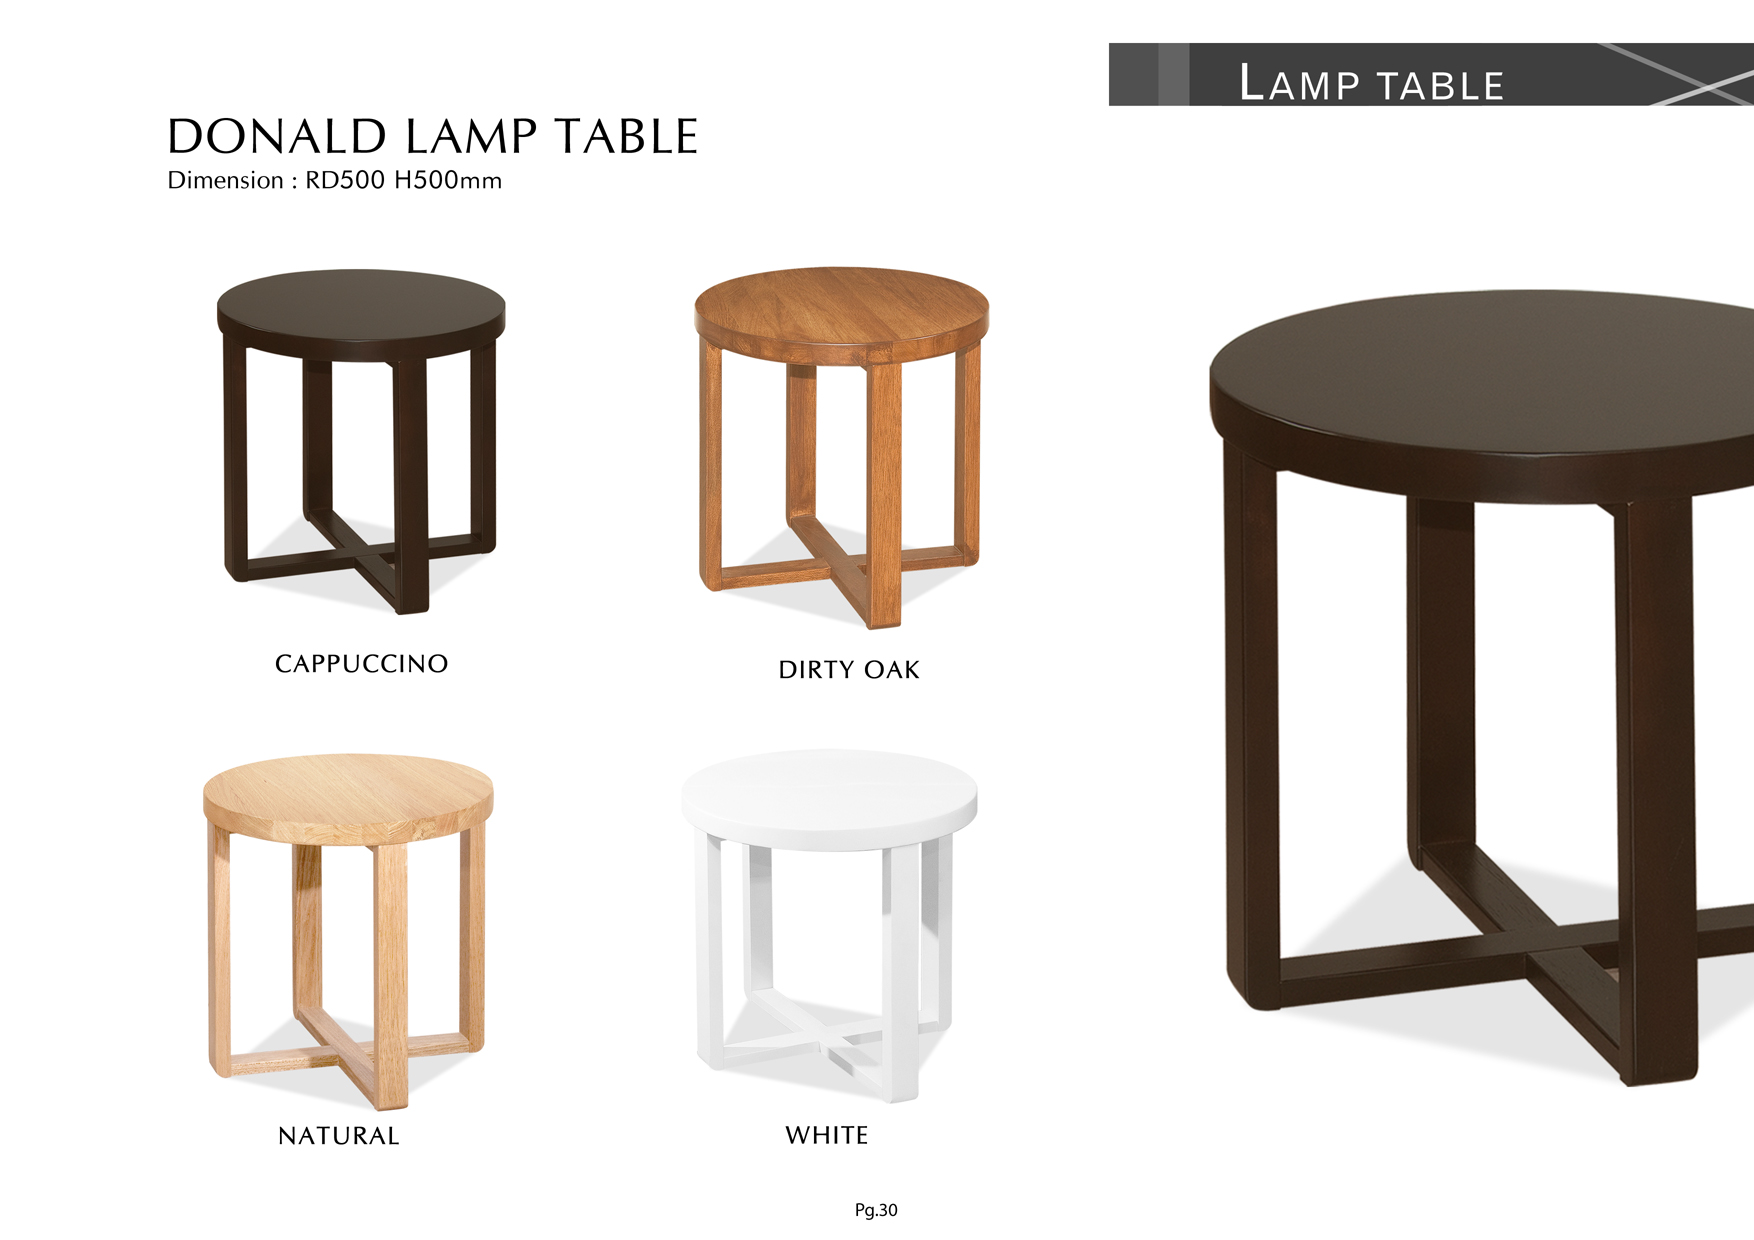 Product: PG30. DONALD LAMP TABLE